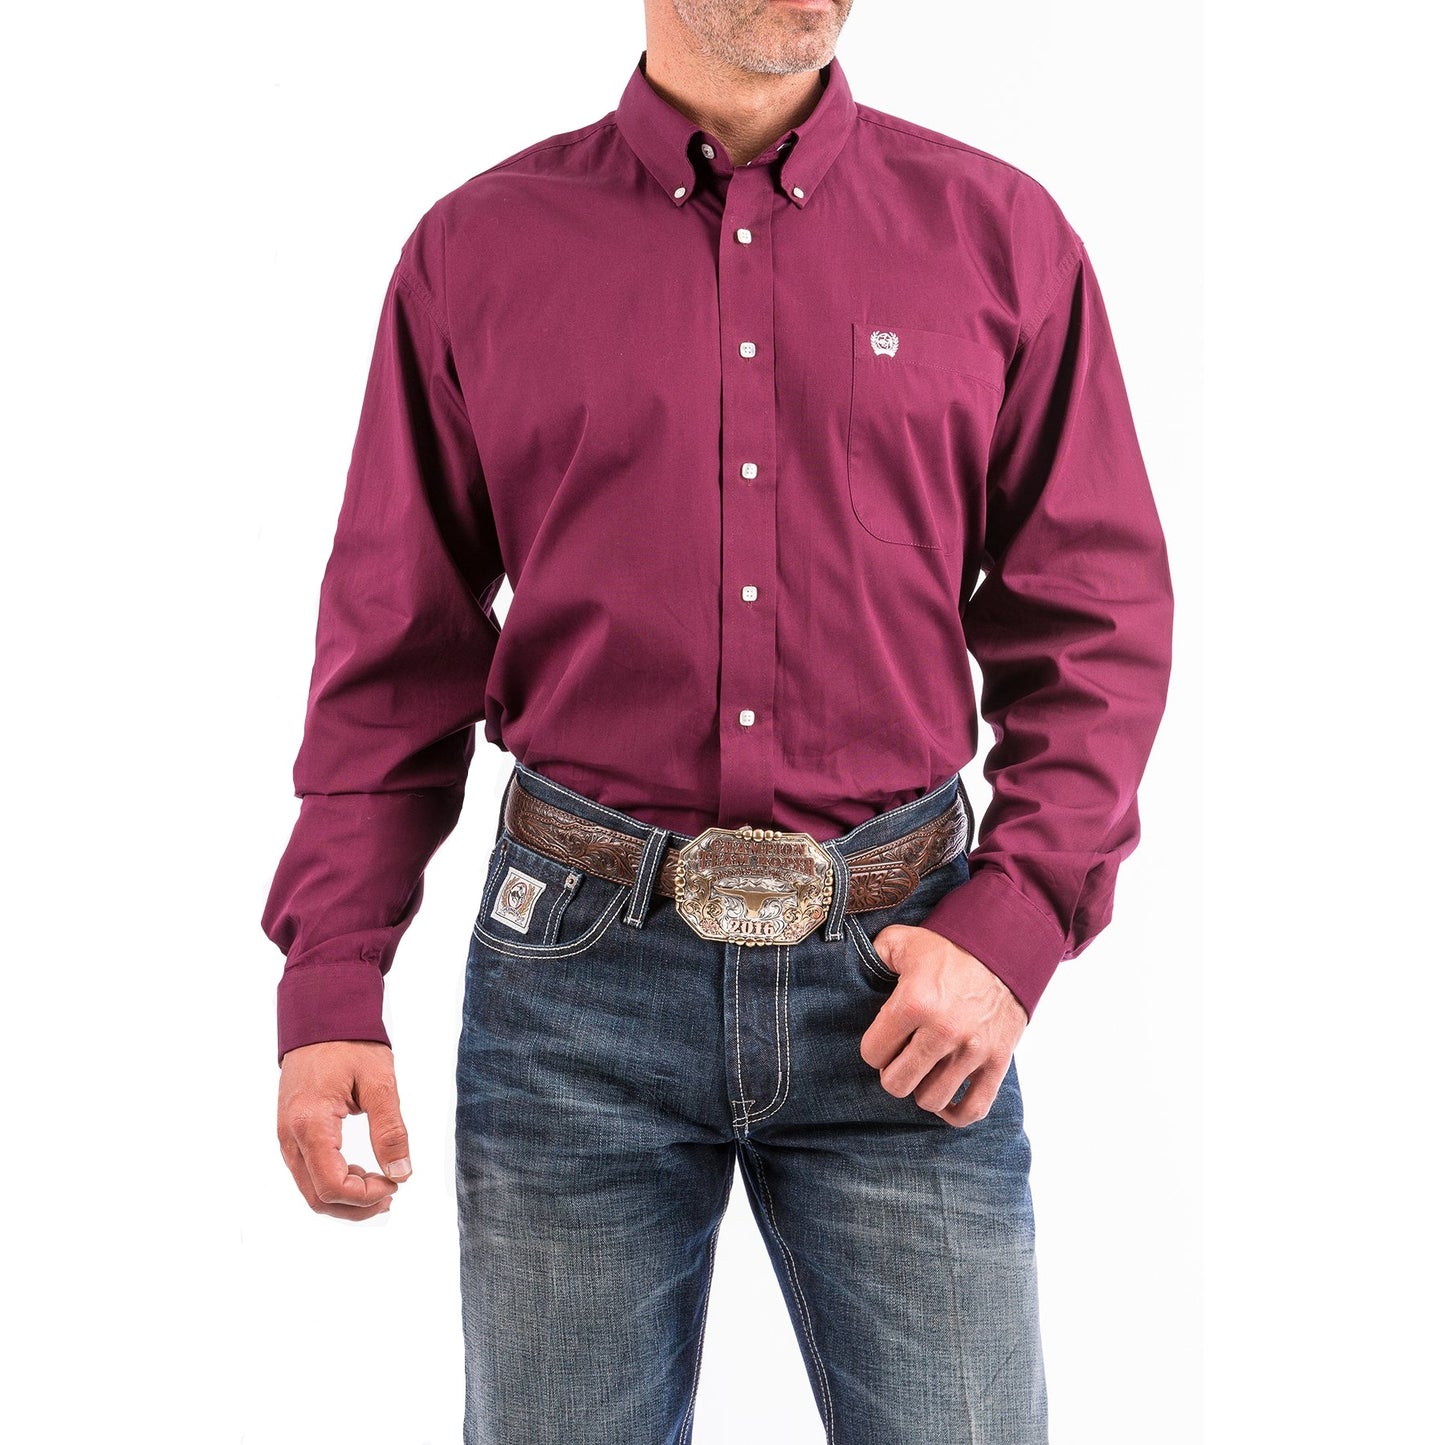 Cinch Men's Long Sleeve Solid Button Down Shirt - Red